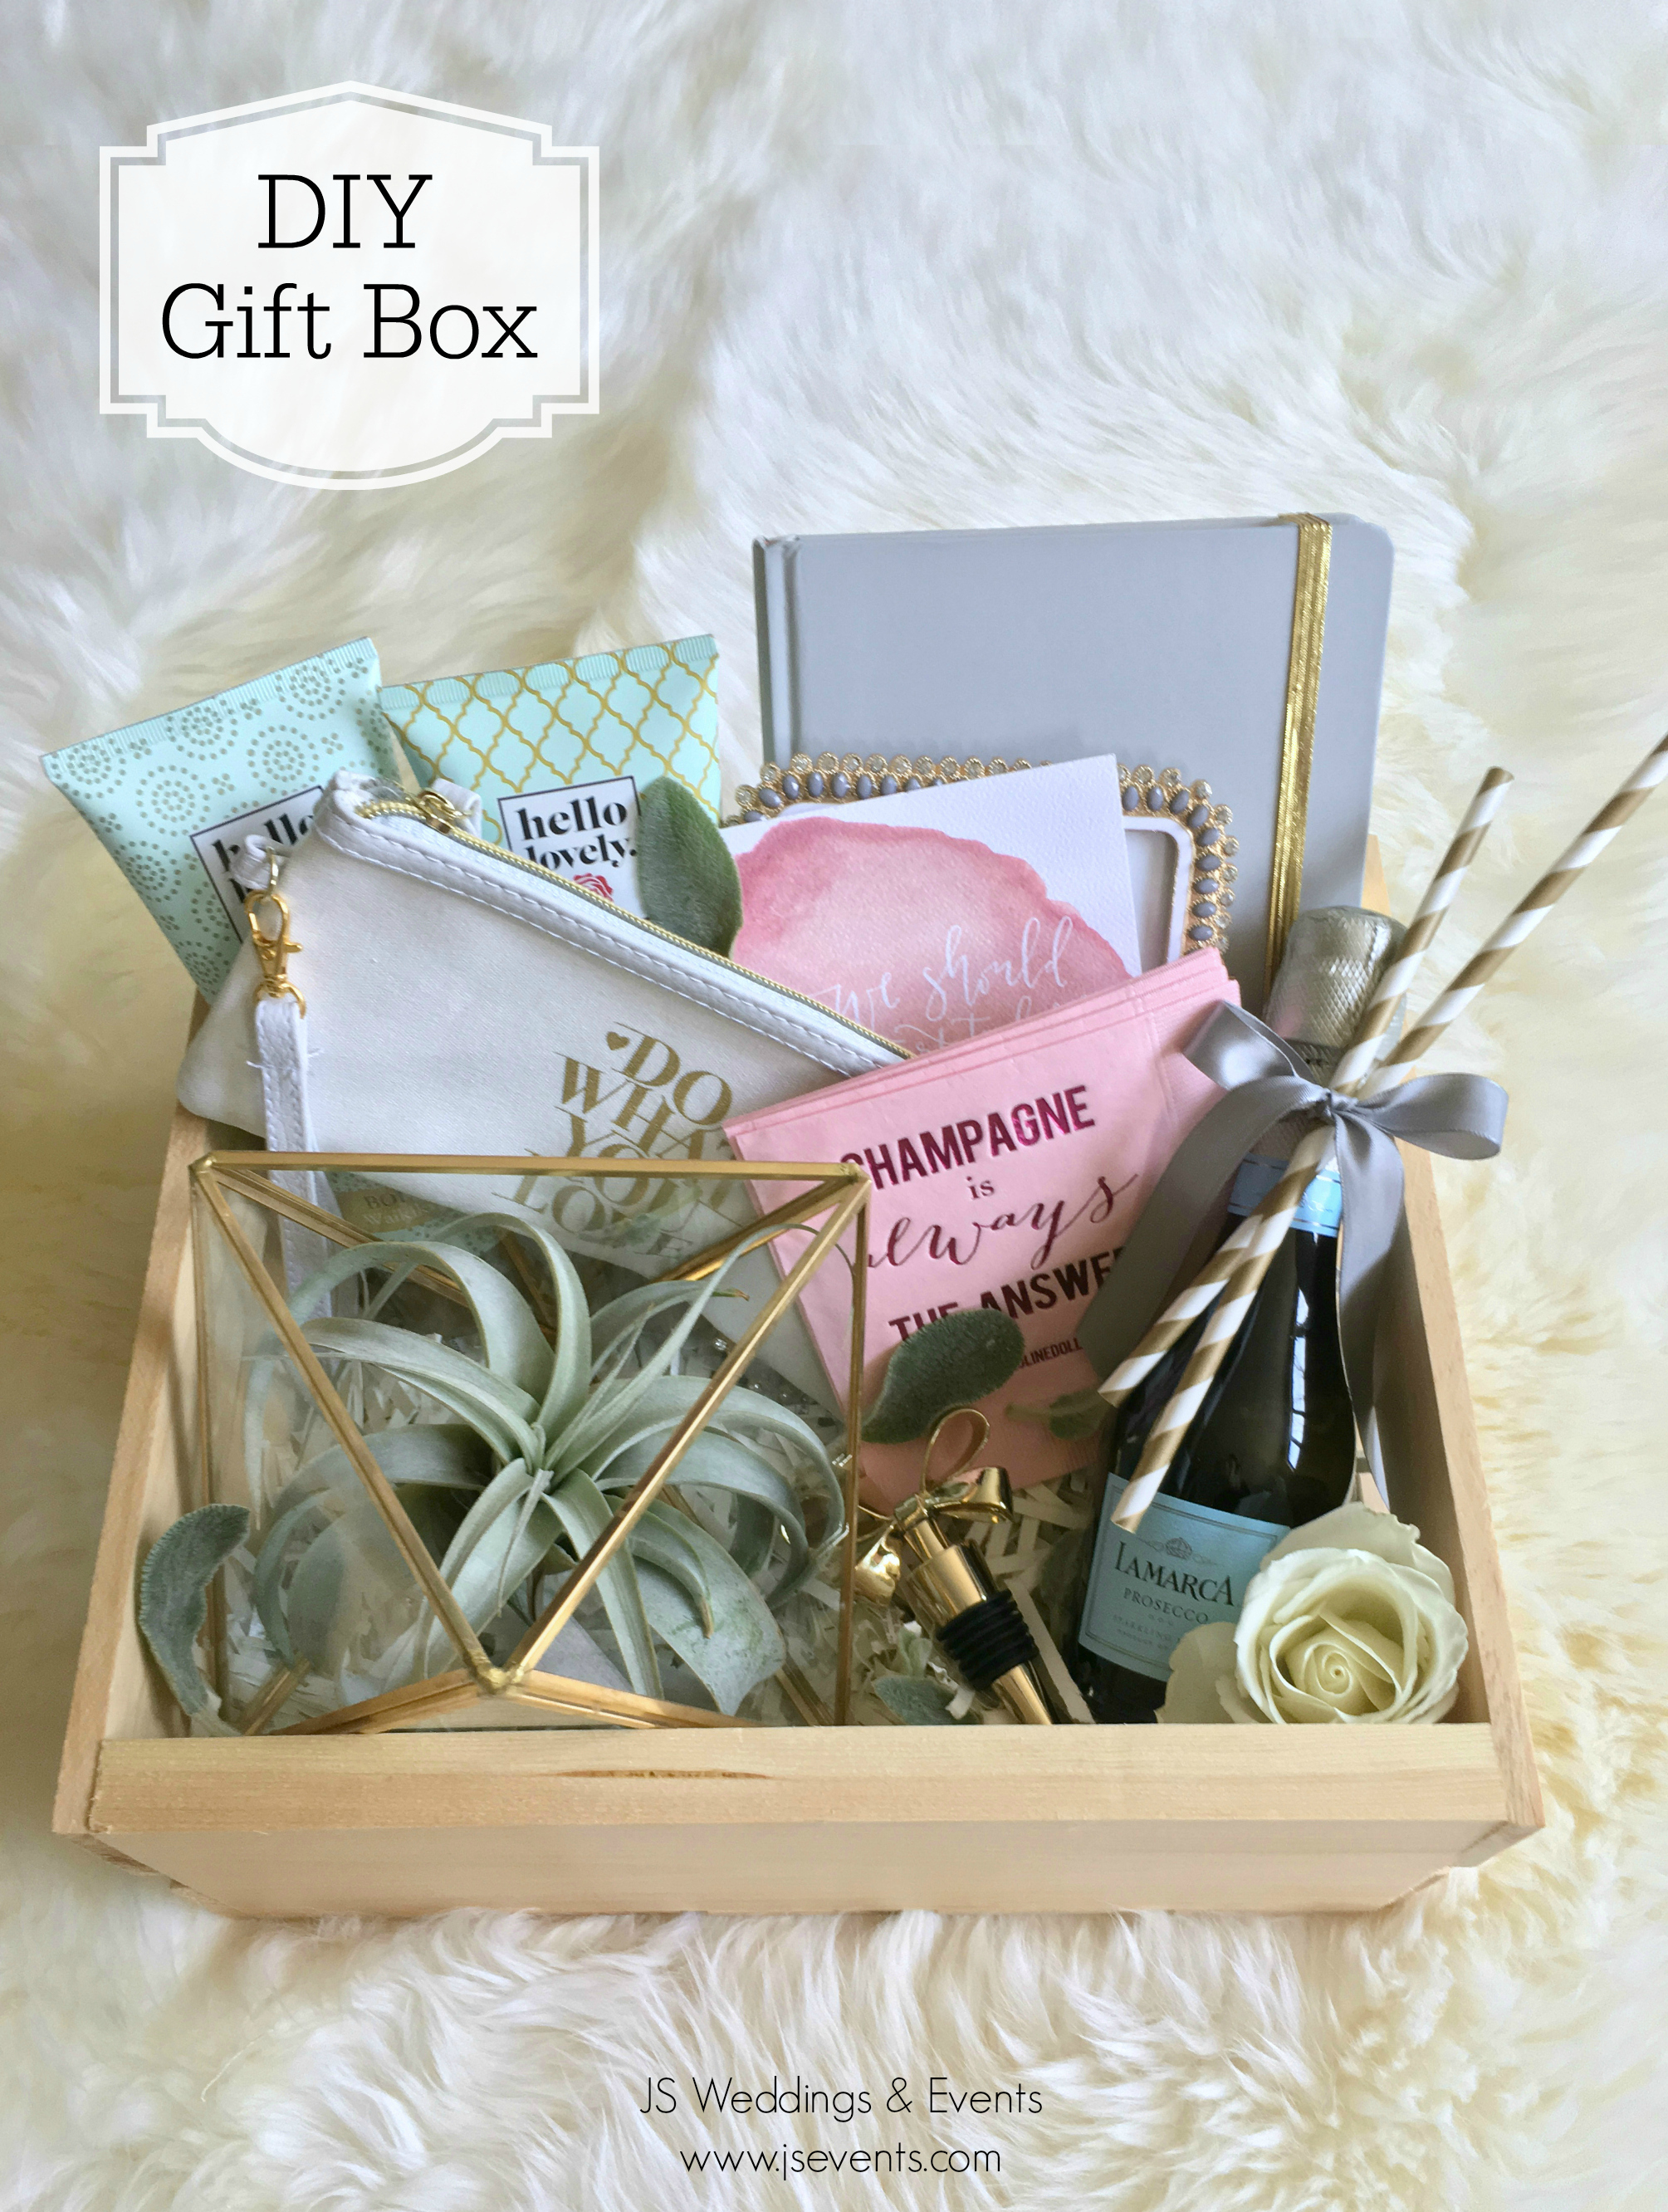 JS Weddings and Events Grand Rapids Wedding Planner and Floral Designer - DIY Bridesmaid Gift Box